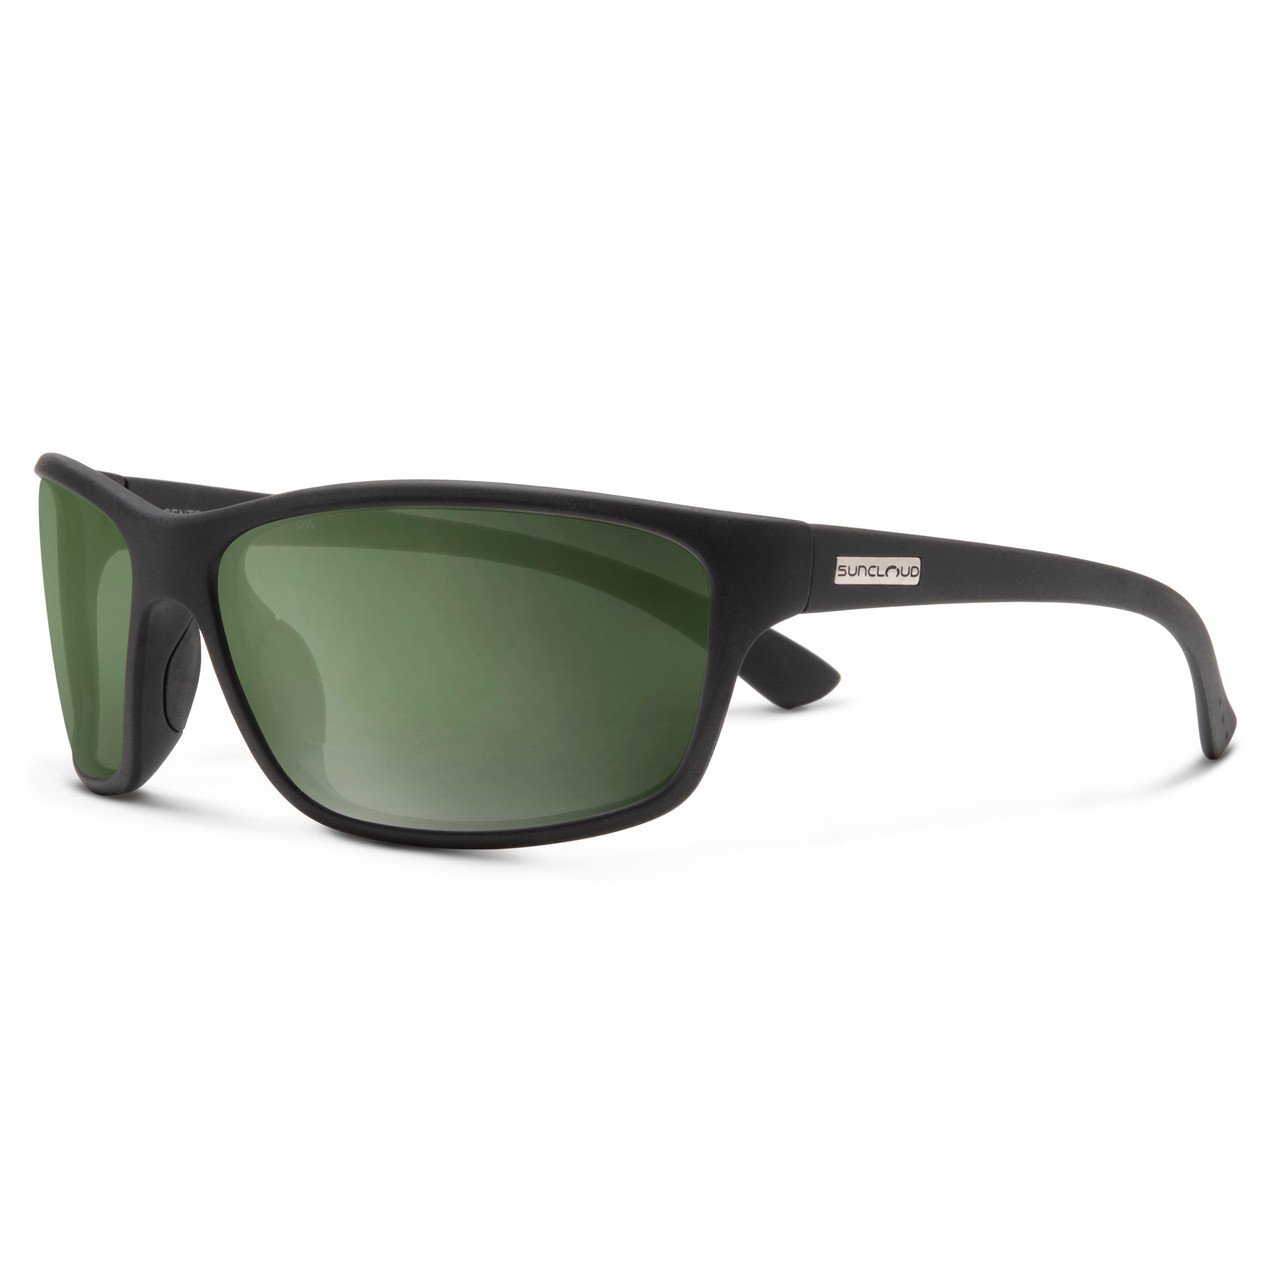 Profile View of Suncloud Sentry Polarized Sunglasses by Smith Optics Classic Wrap in Matte Black with Polar Gray Green